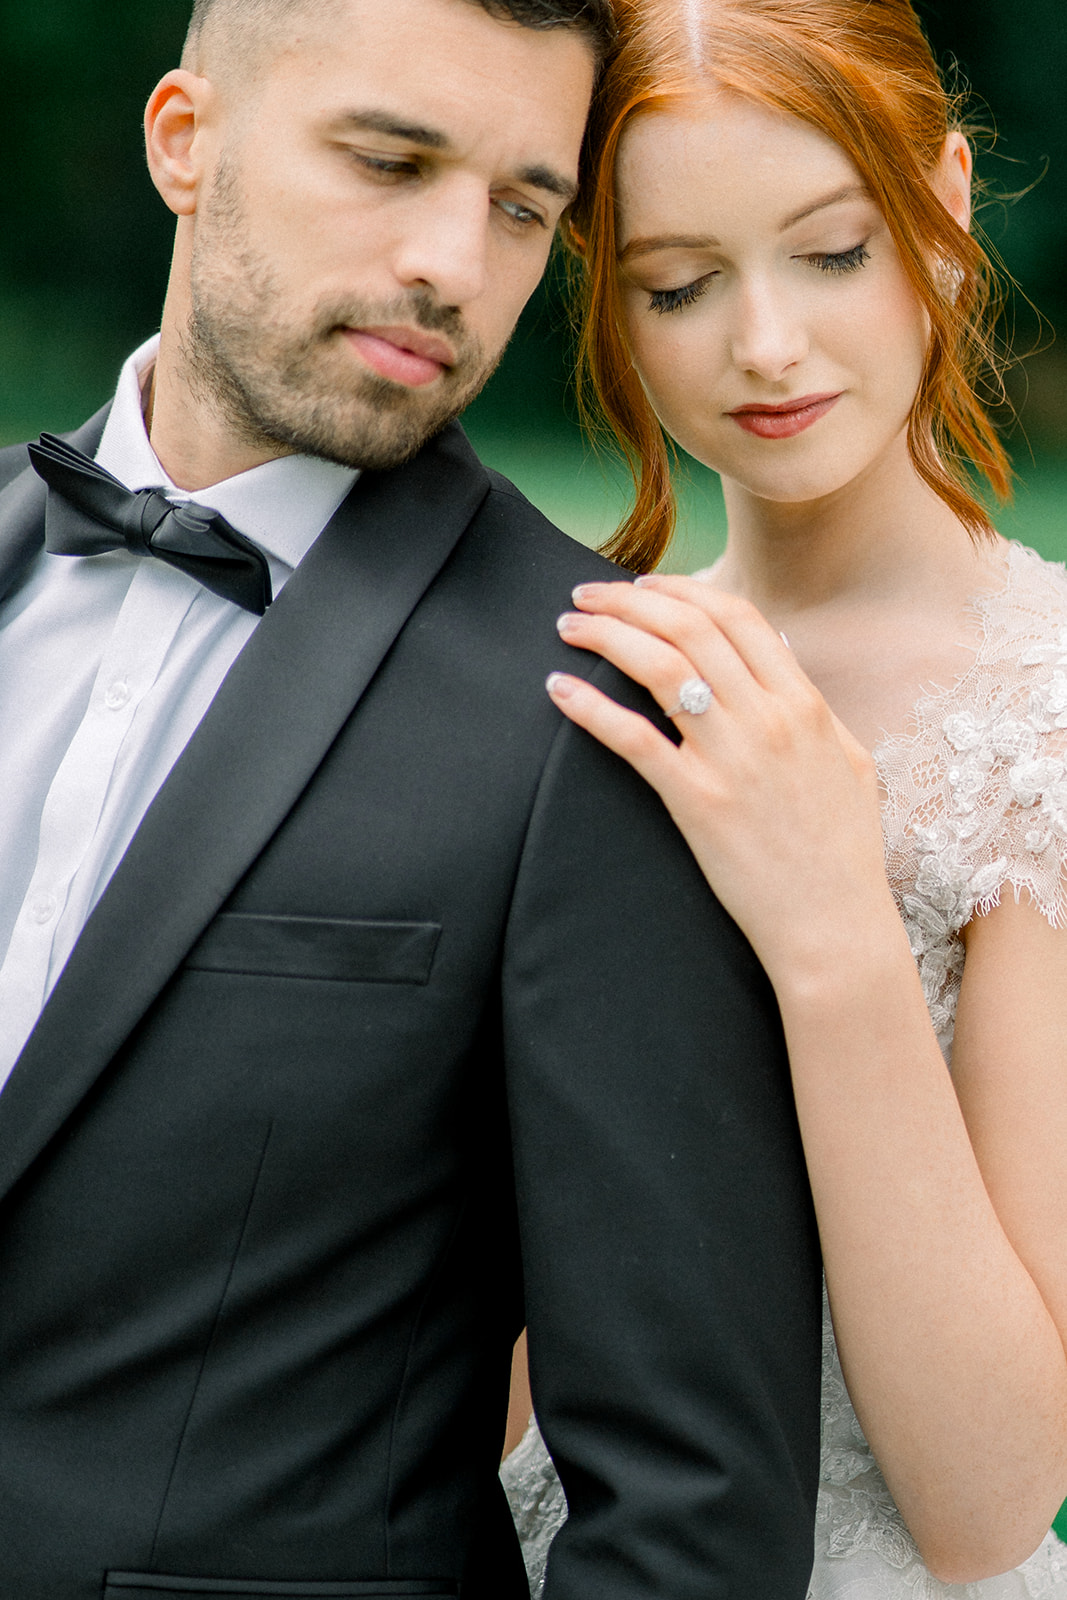 Close-up of a couple's intimate embrace, with focus on the bride's lace sleeve and the groom's black bow tie.